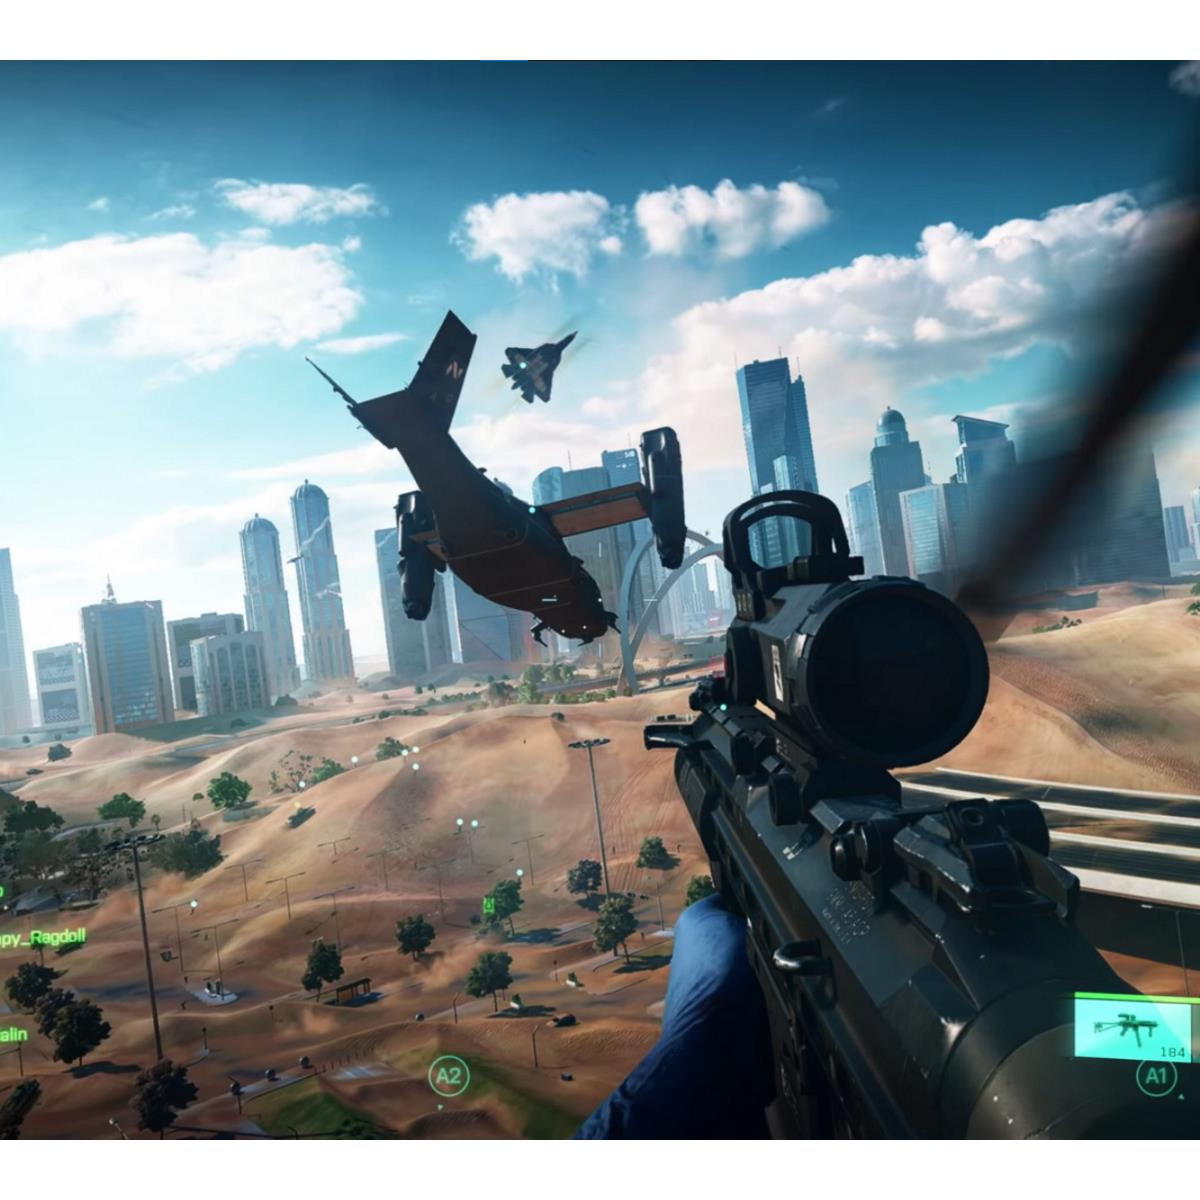 Battlefield 2042 gameplay, features, Grappling Hook showcased at E3 2021 -  Dexerto